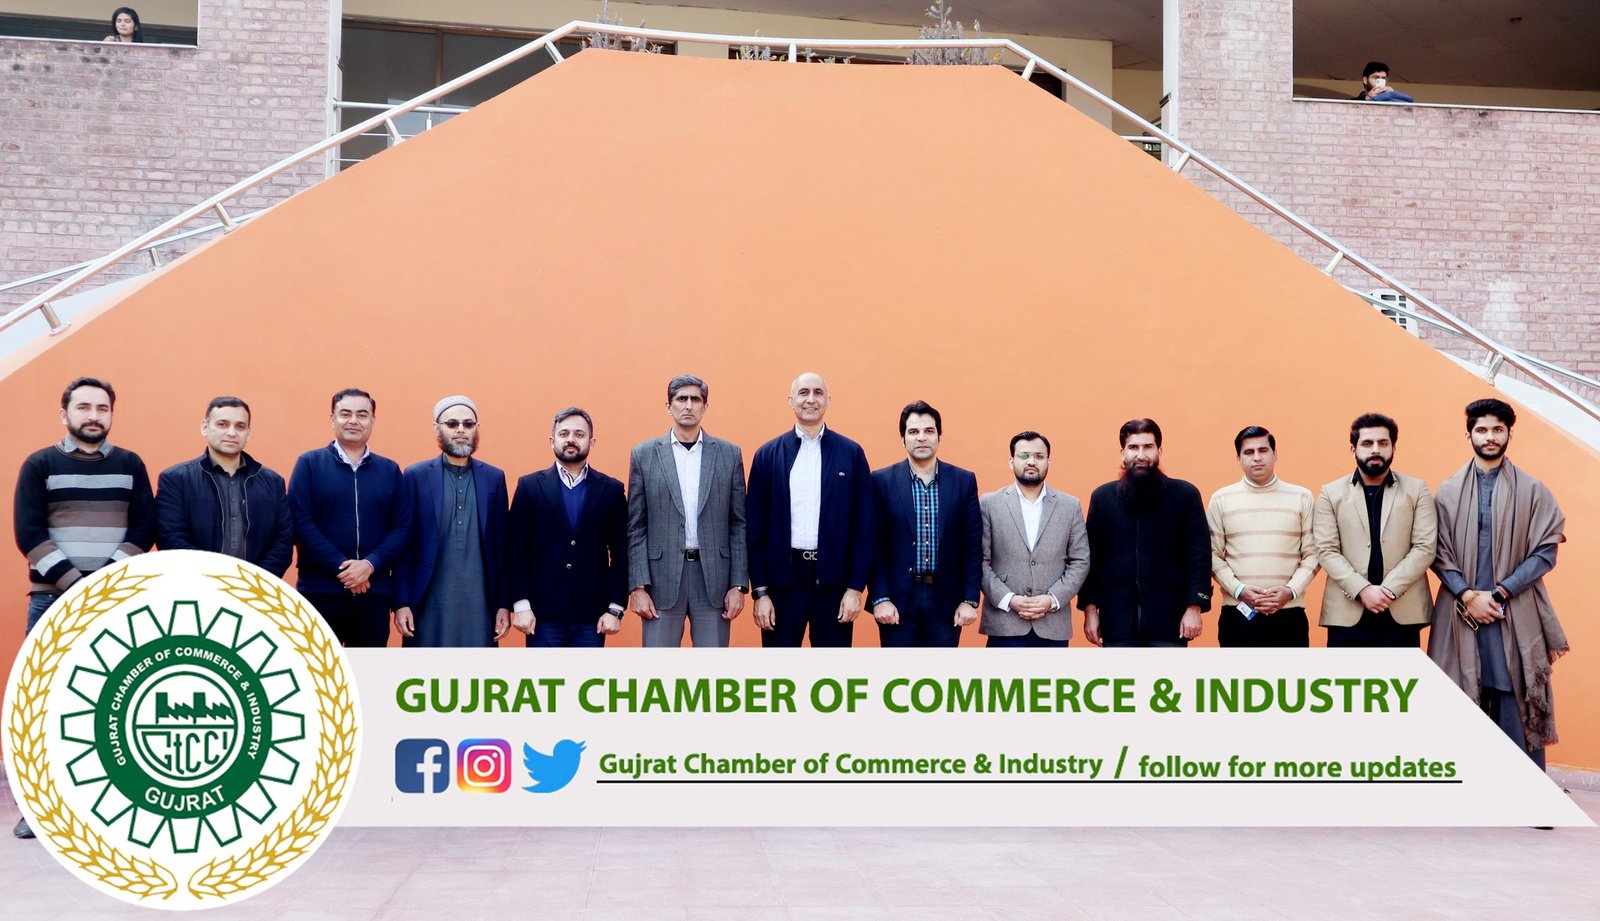 A #delegation of #Gujrat_Chamber_of_Commerce_and_Industry in the #leadership of Mr. Sikander Ishfaq Razi #President (GTCCI) visited #University_of_Chenab.